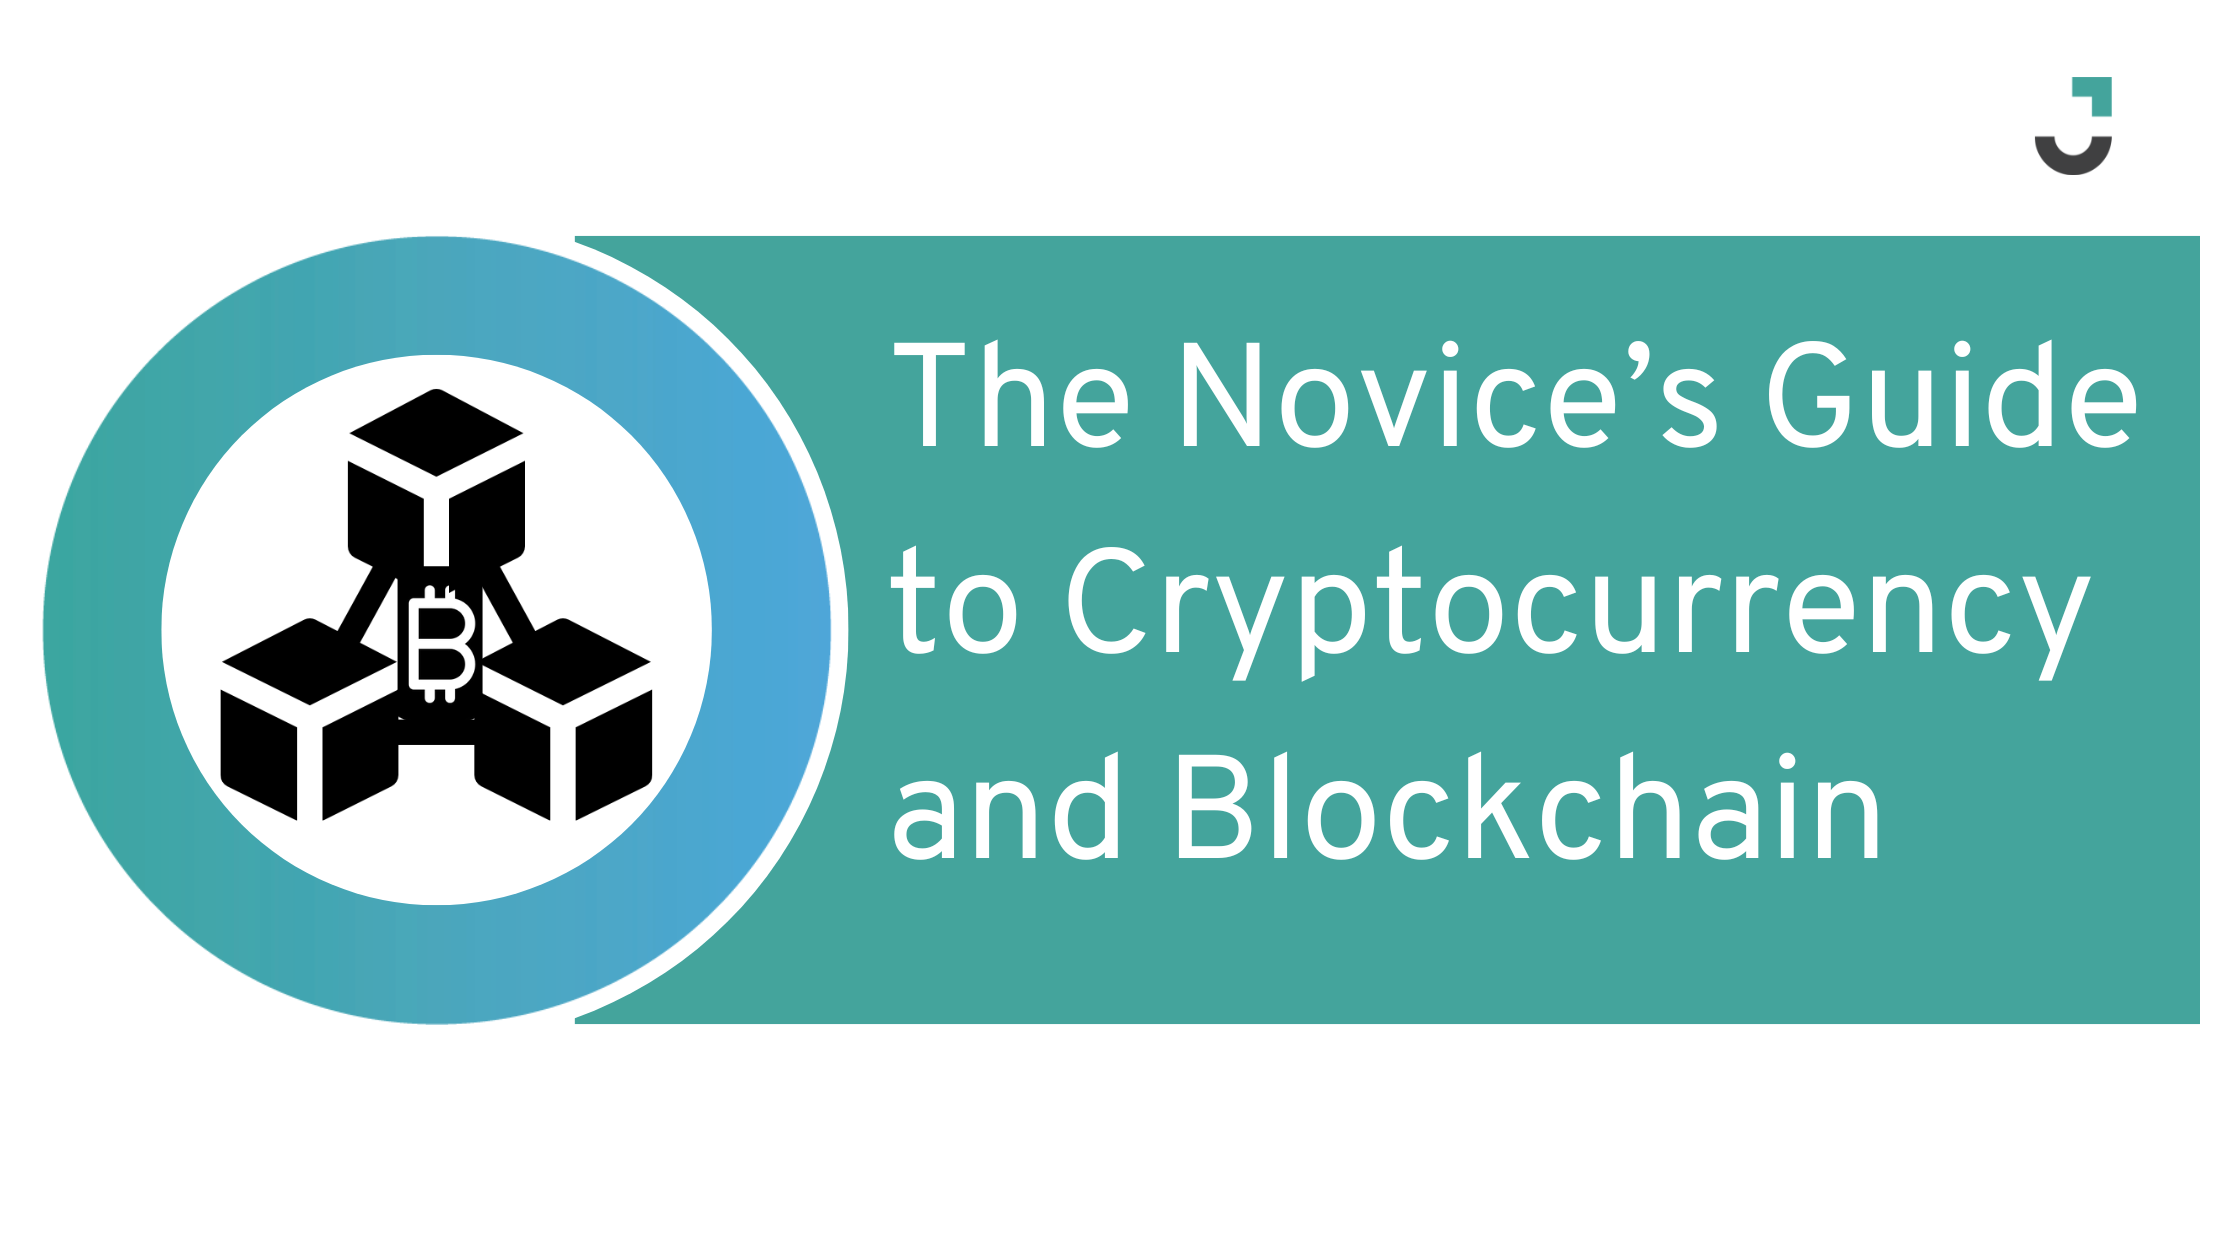 The Novice’s Guide to Cryptocurrency and Blockchain